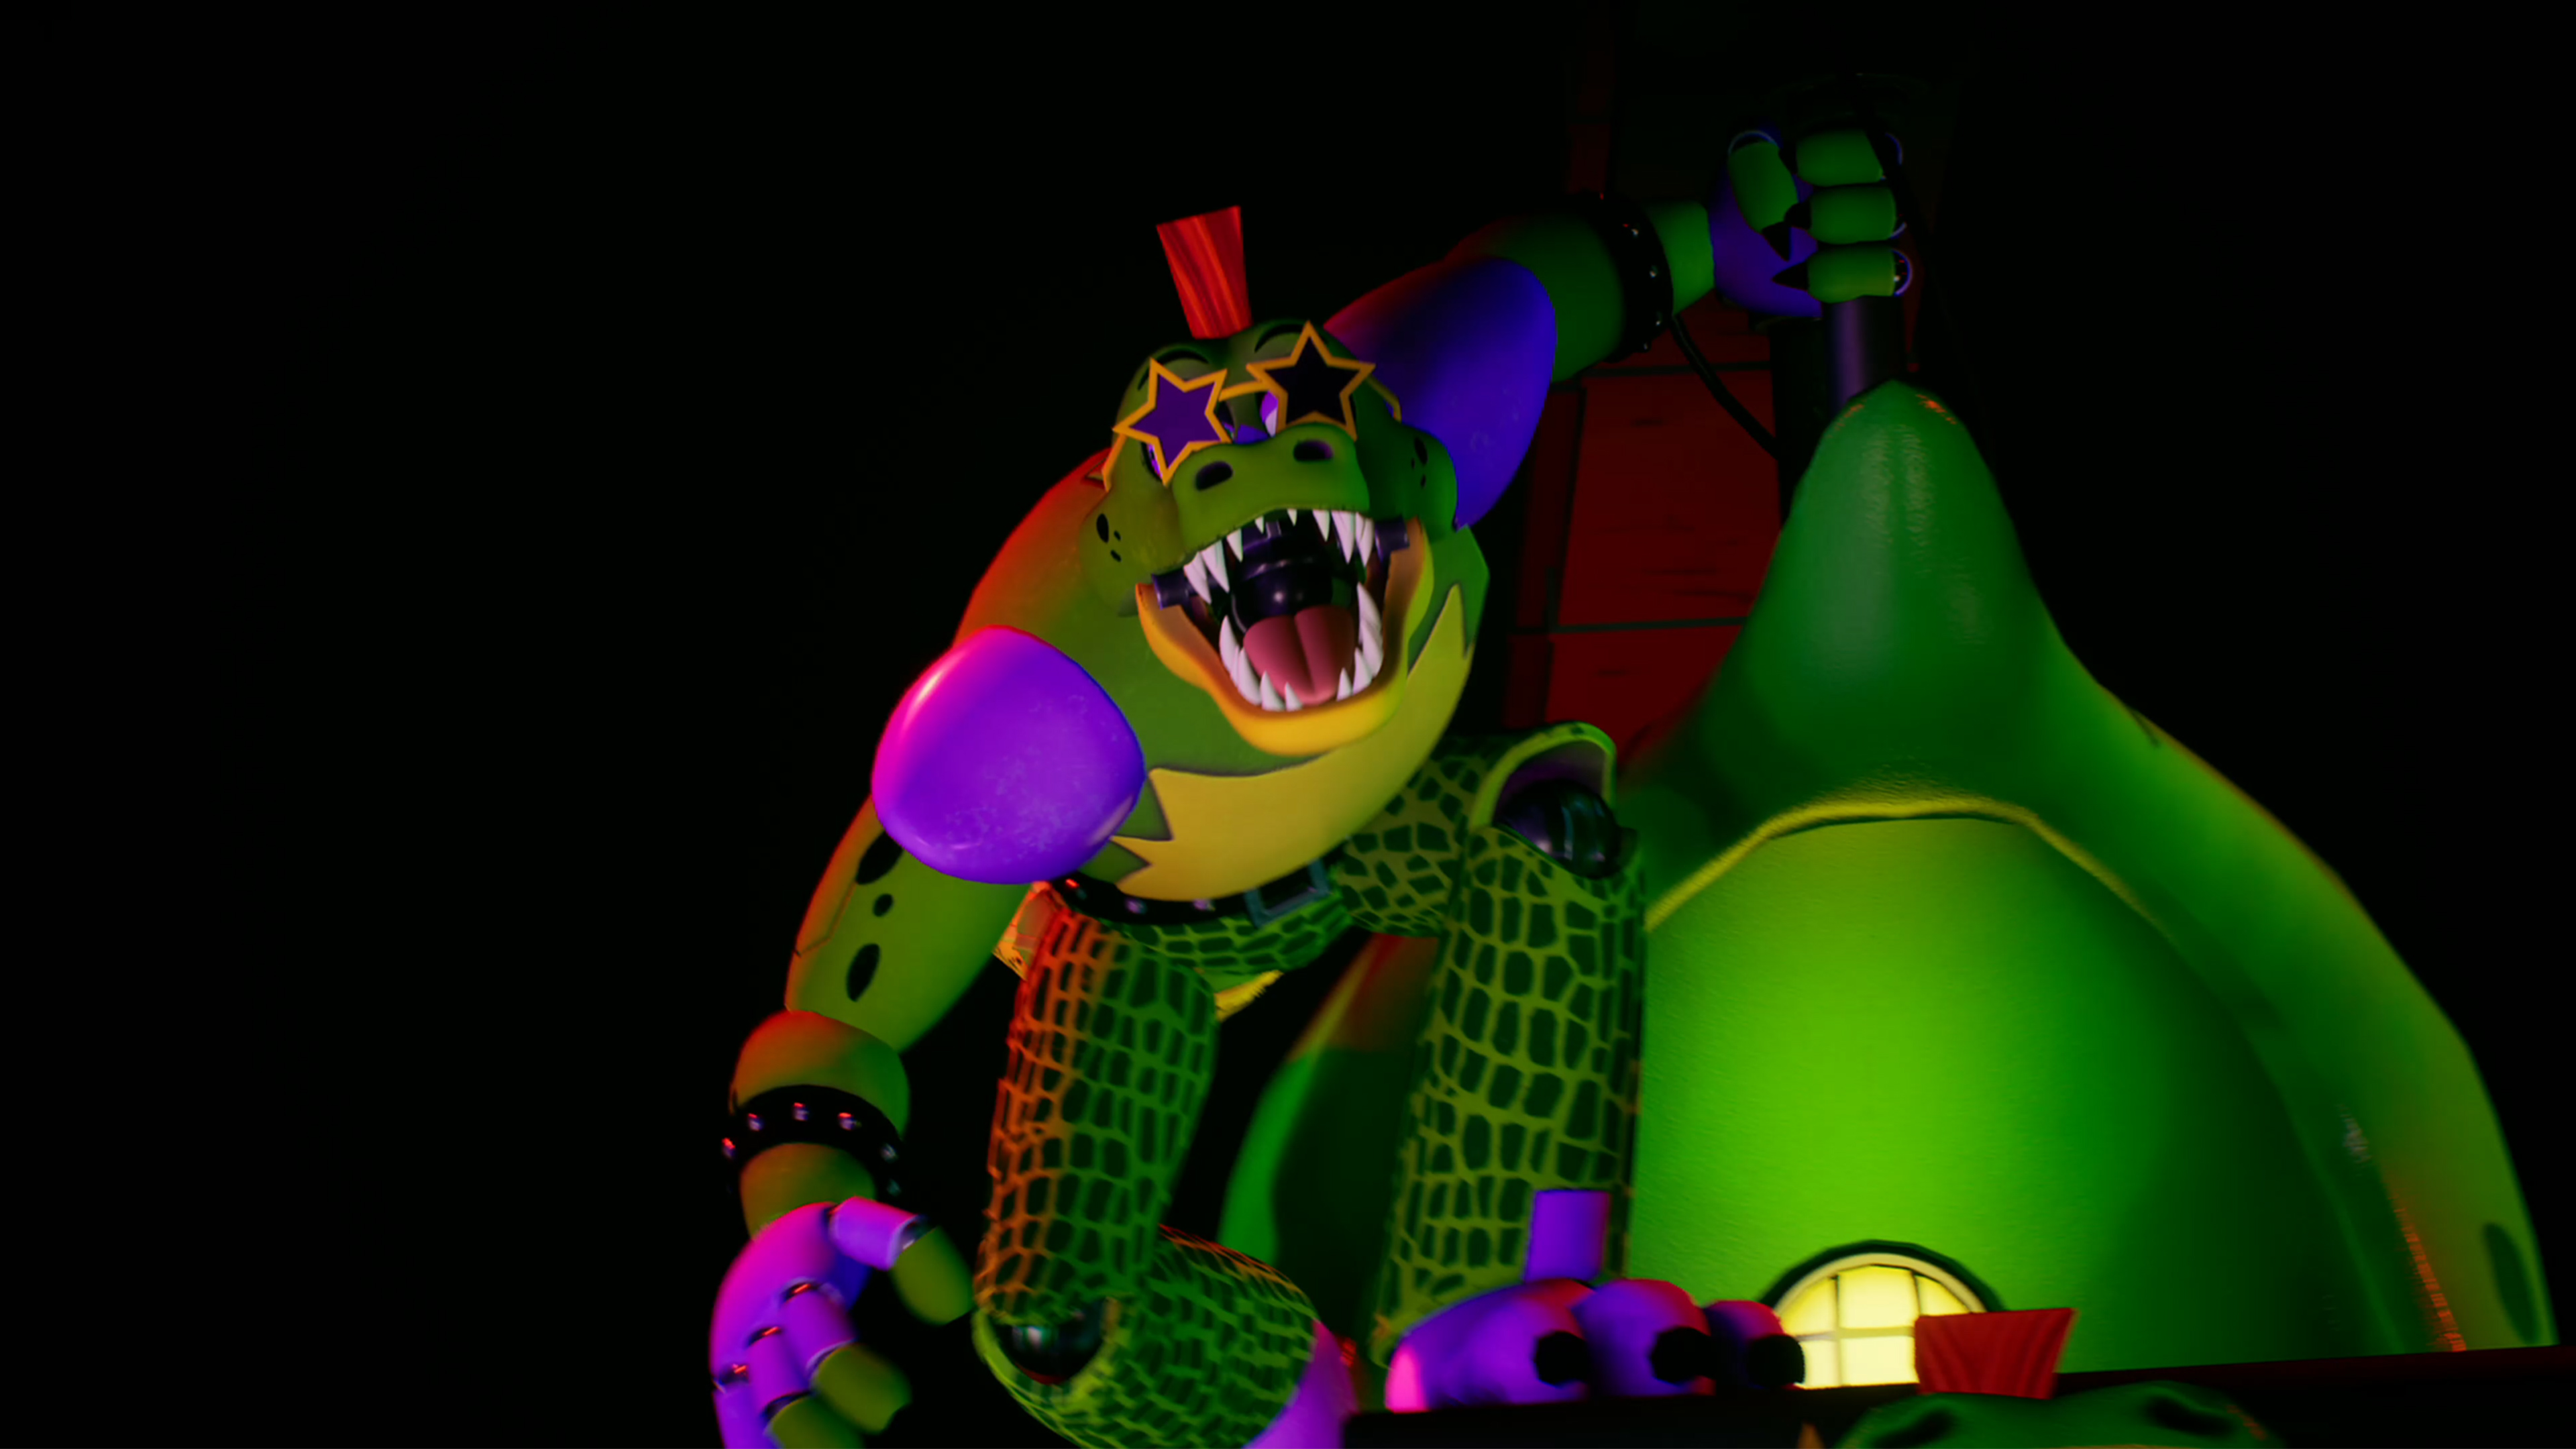 FNAF 2 Unblocked: Play Anywhere In School, Work, And Beyond In